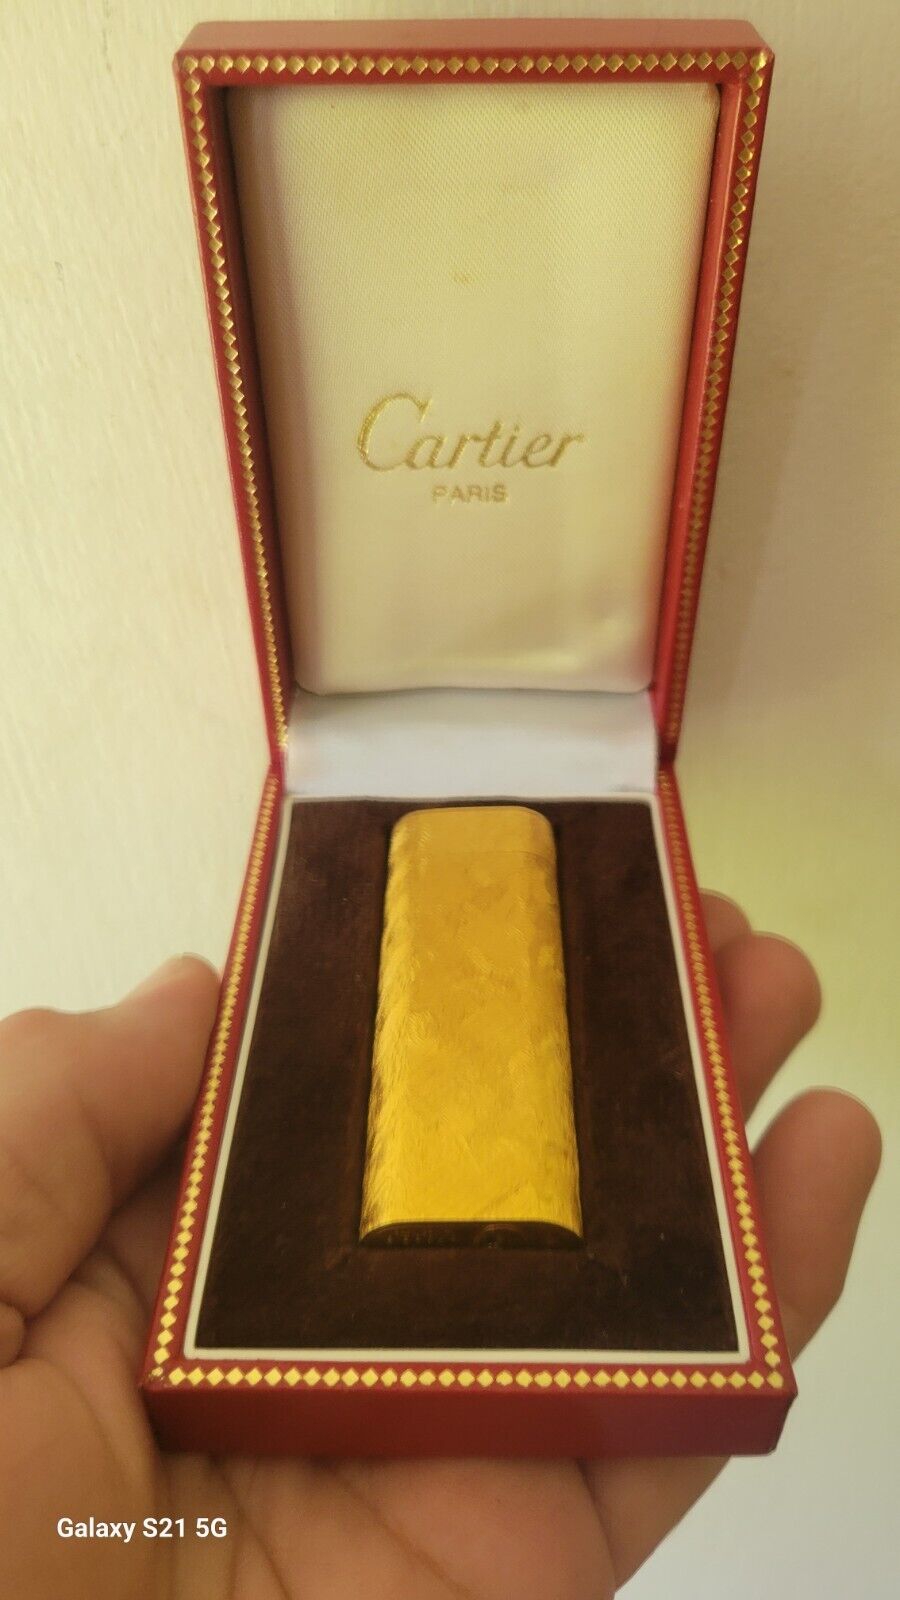 Vintage Cartier Lighter Gold Oval Mint with Original Box Papers NEW